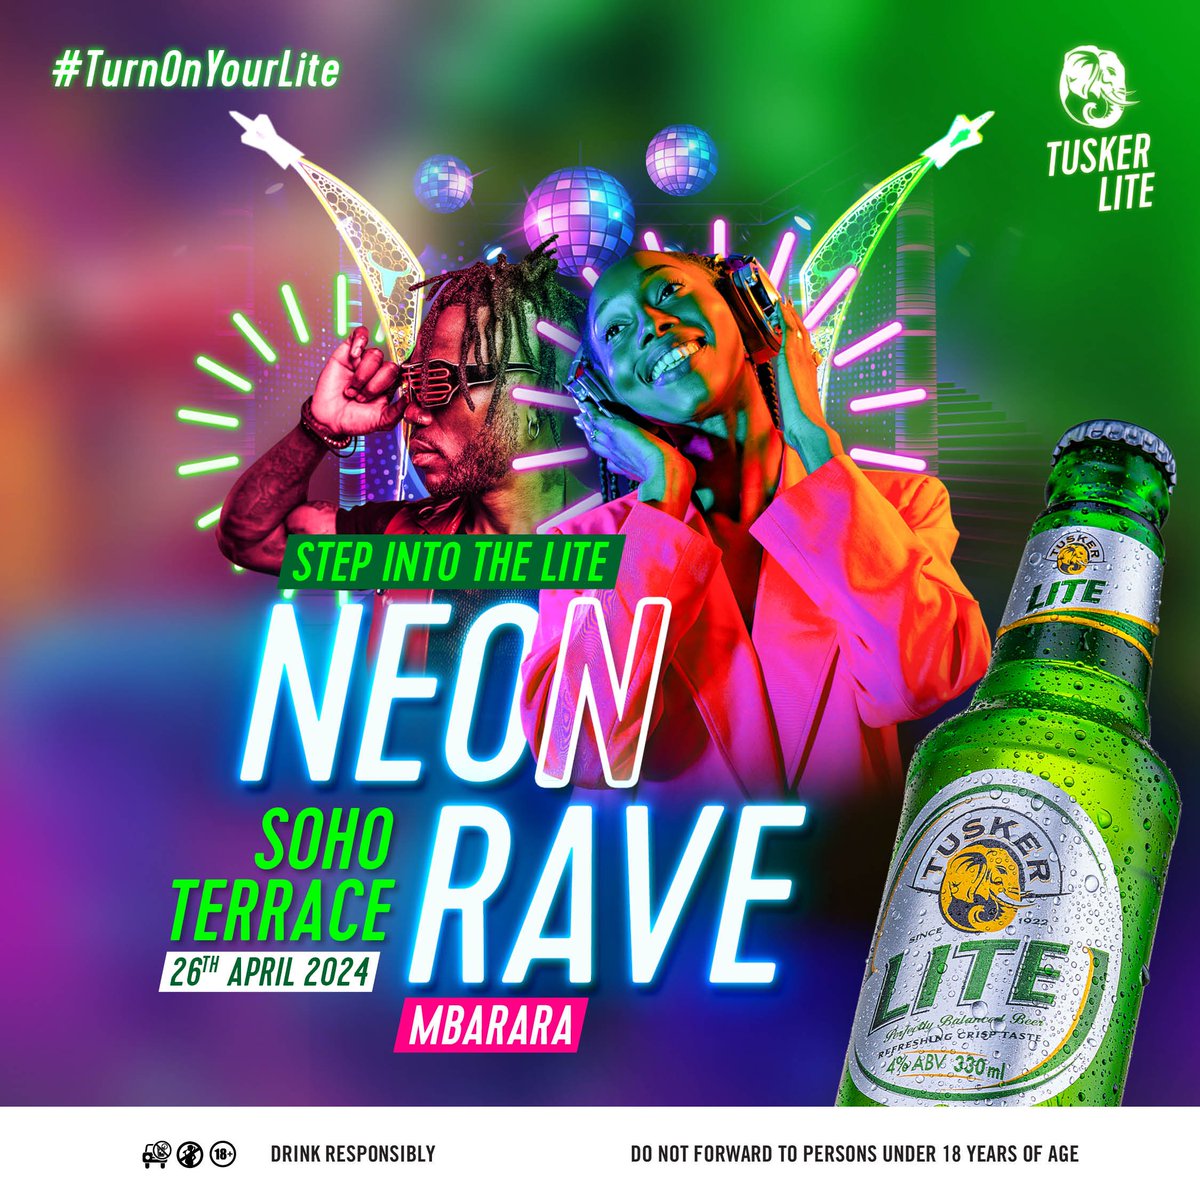 Y'all already know the drill, it's on @SoHoTerraceMbra on 26th April #NeonRaveMbarara #TurnOnYourLite #SoHoFridays 🎉🎉🎉🎉🥳🥳